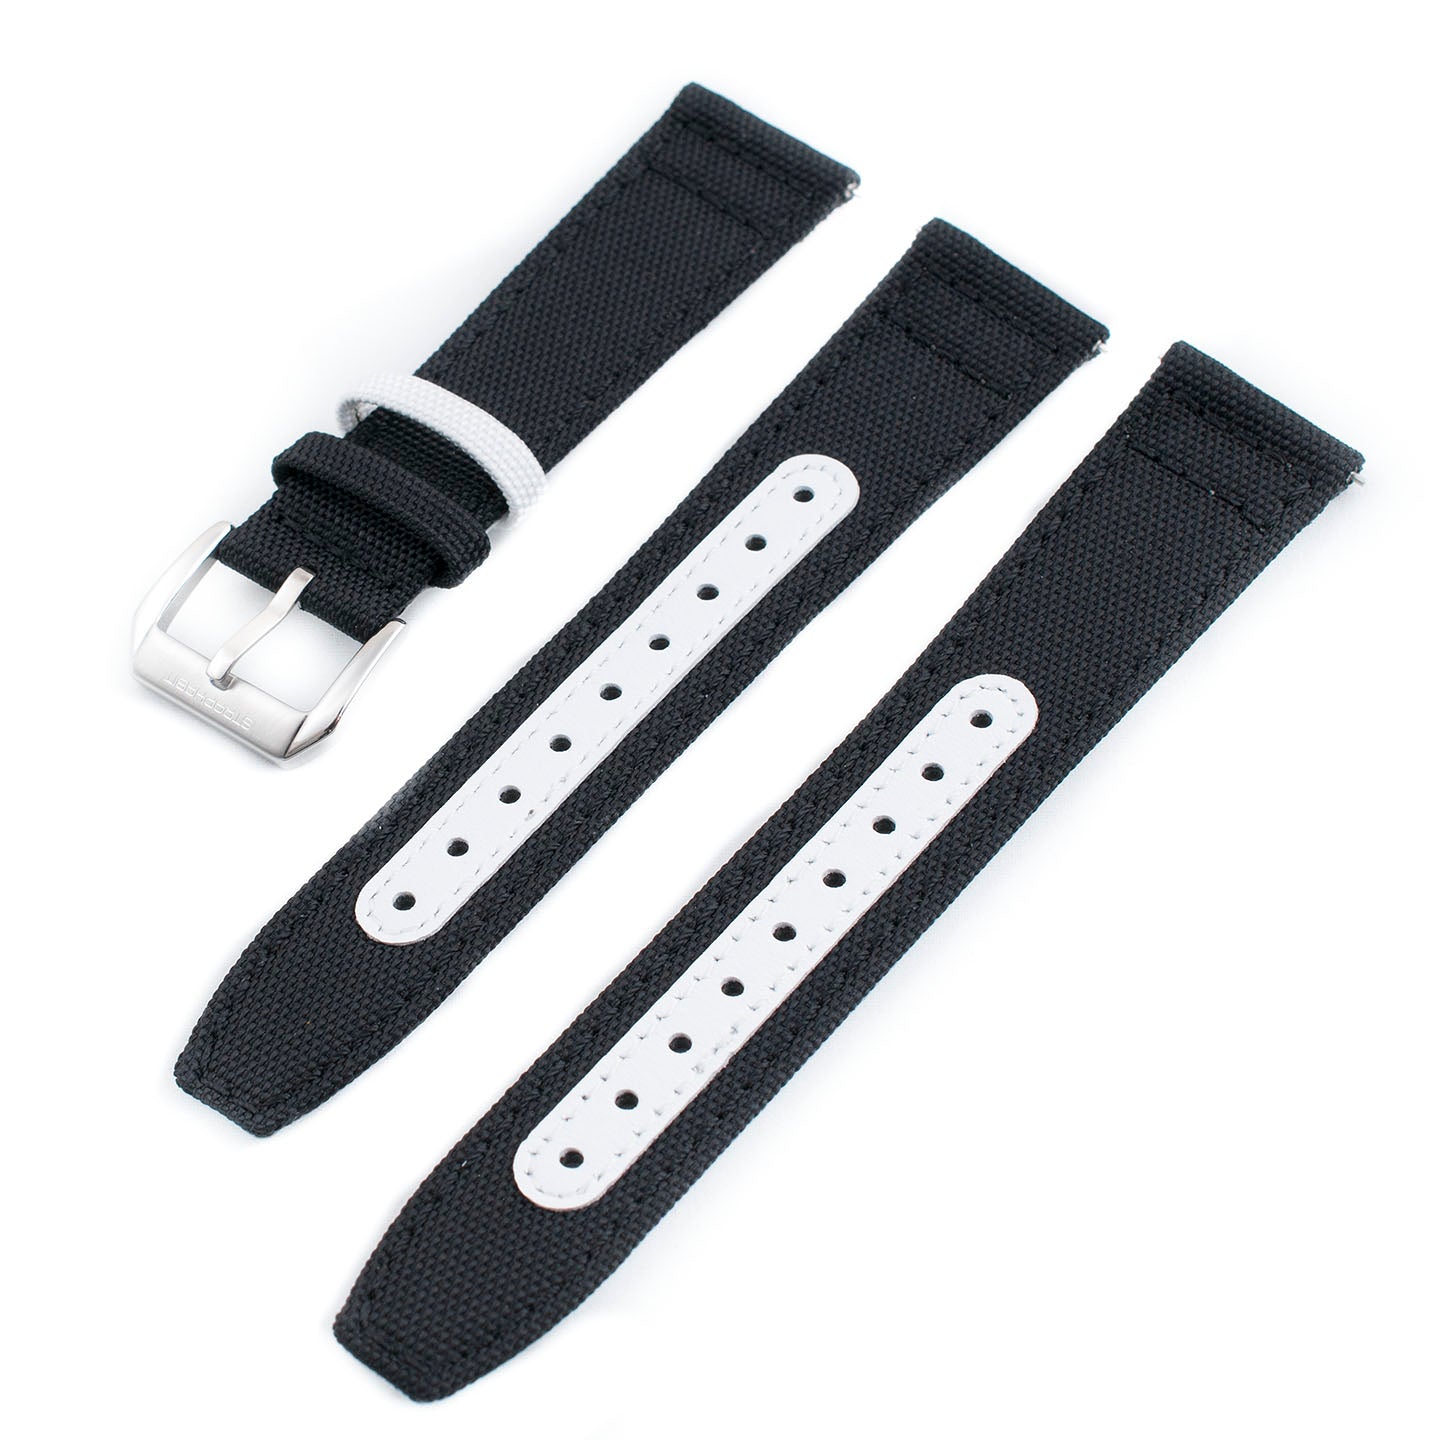 Premium Sailcloth Colorway Quick Release Watch Strap band replacement 19mm, 20mm, 21mm, 22mm for large wrists and small wrists, for men and women, unisex white black reverse panda